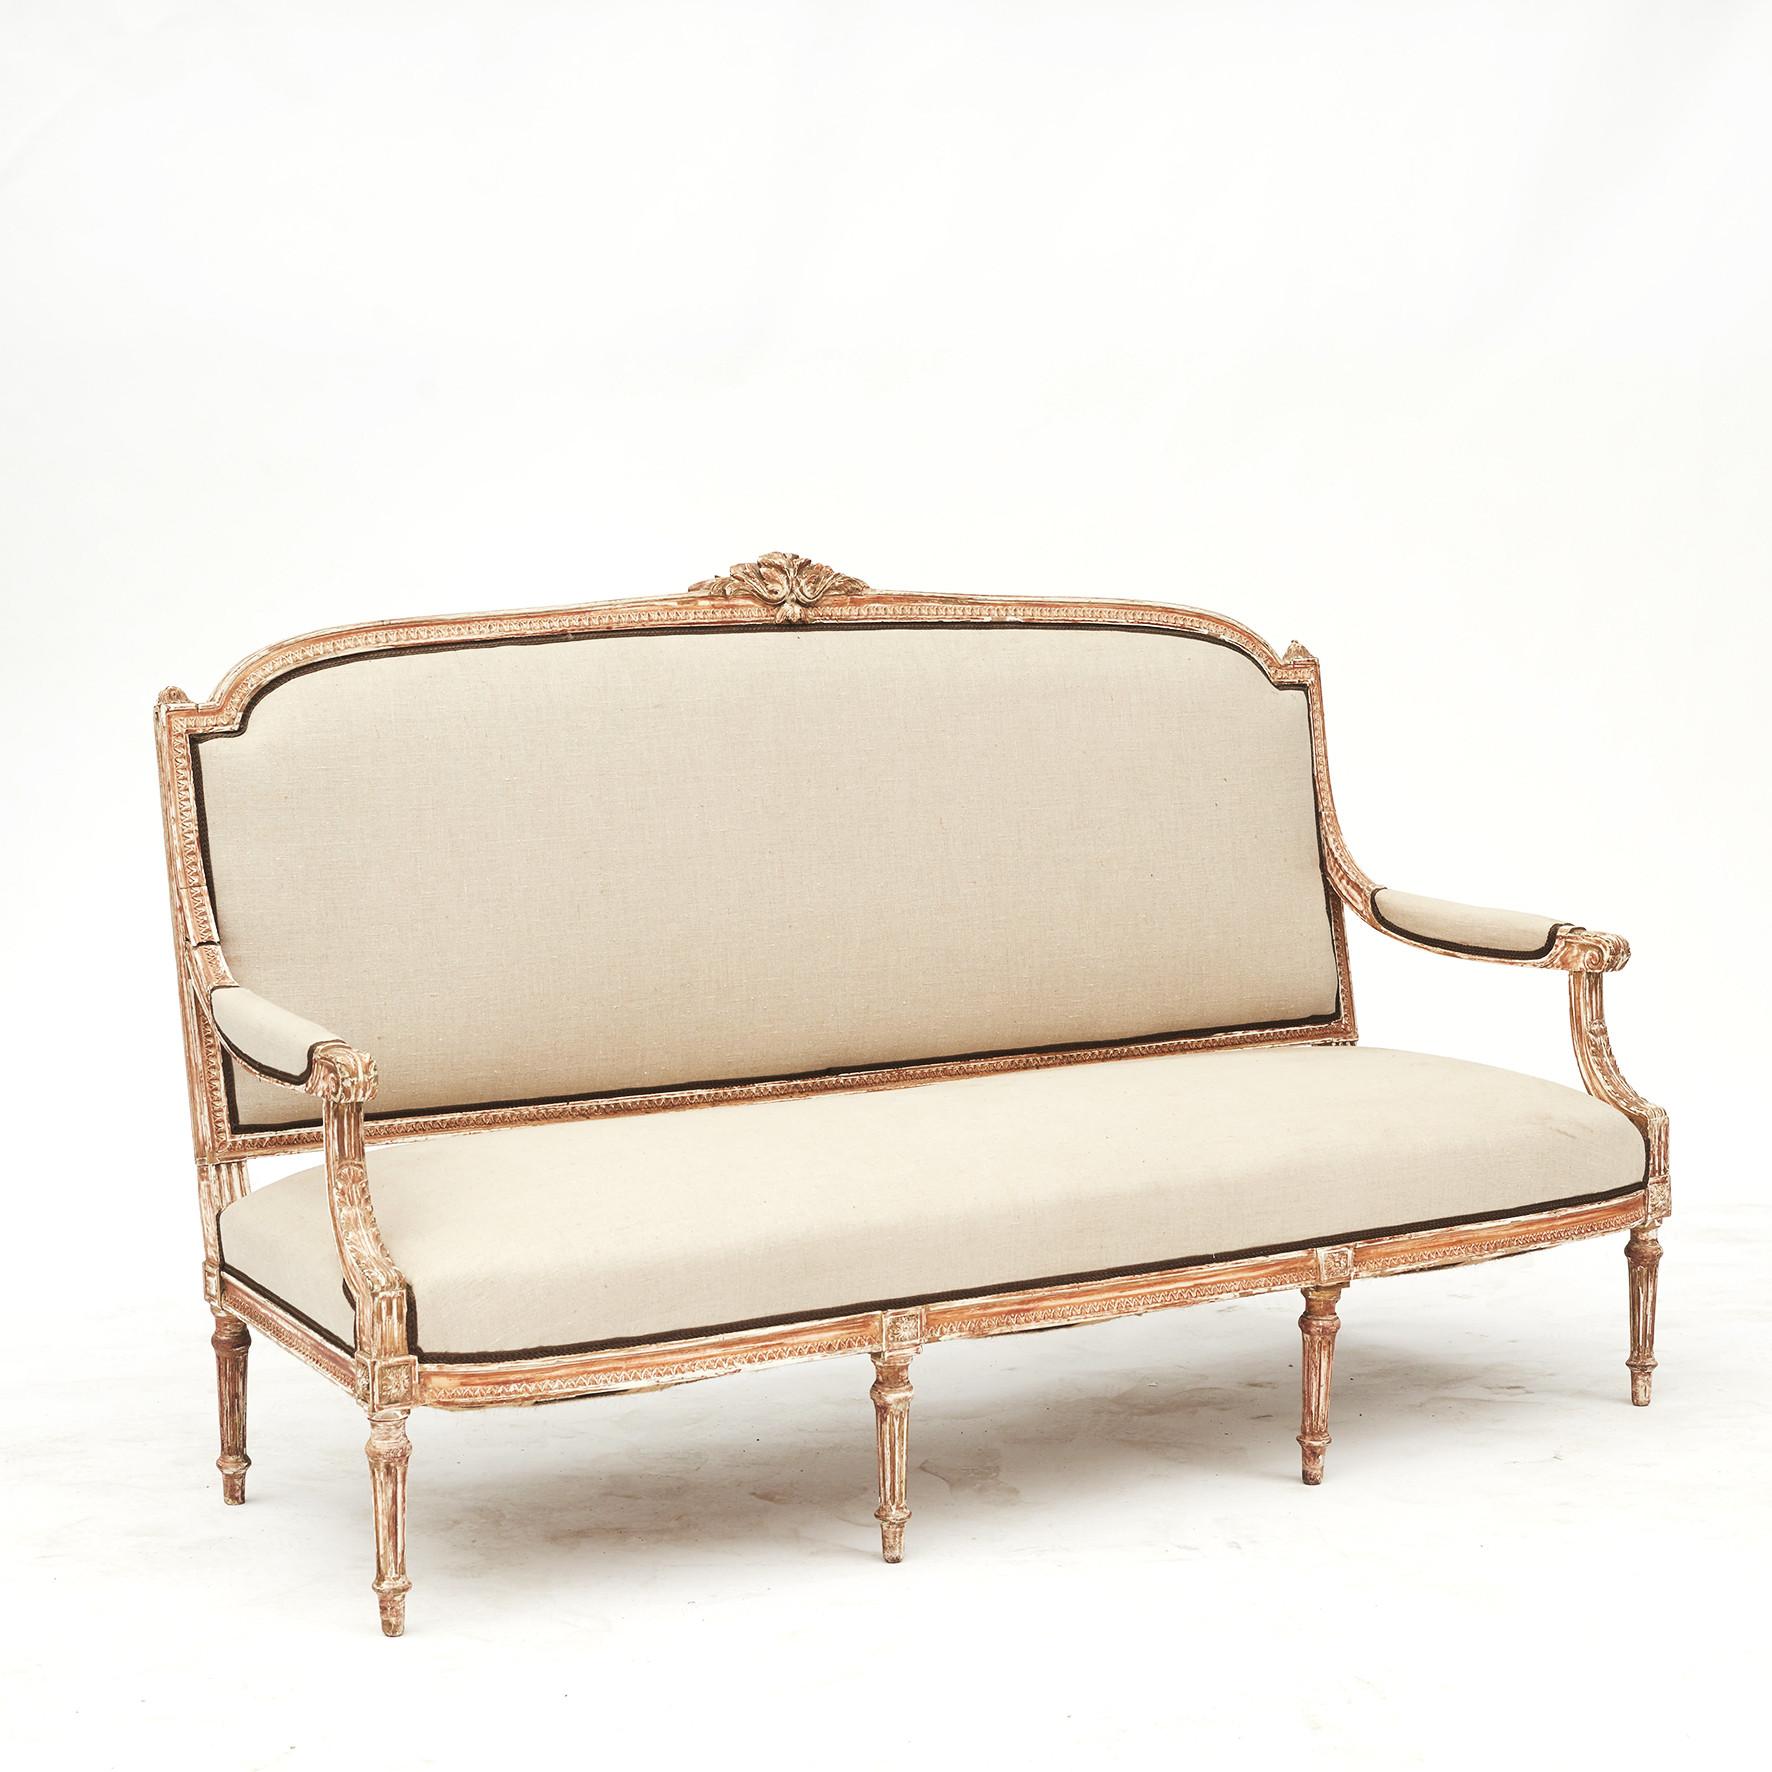 Louis XVI style canapé sofa (sofa bench), c. 1860.
Original undercoat paint with good patina.
Newly upholstered in gray canvas fabric.
France approx. 1860.